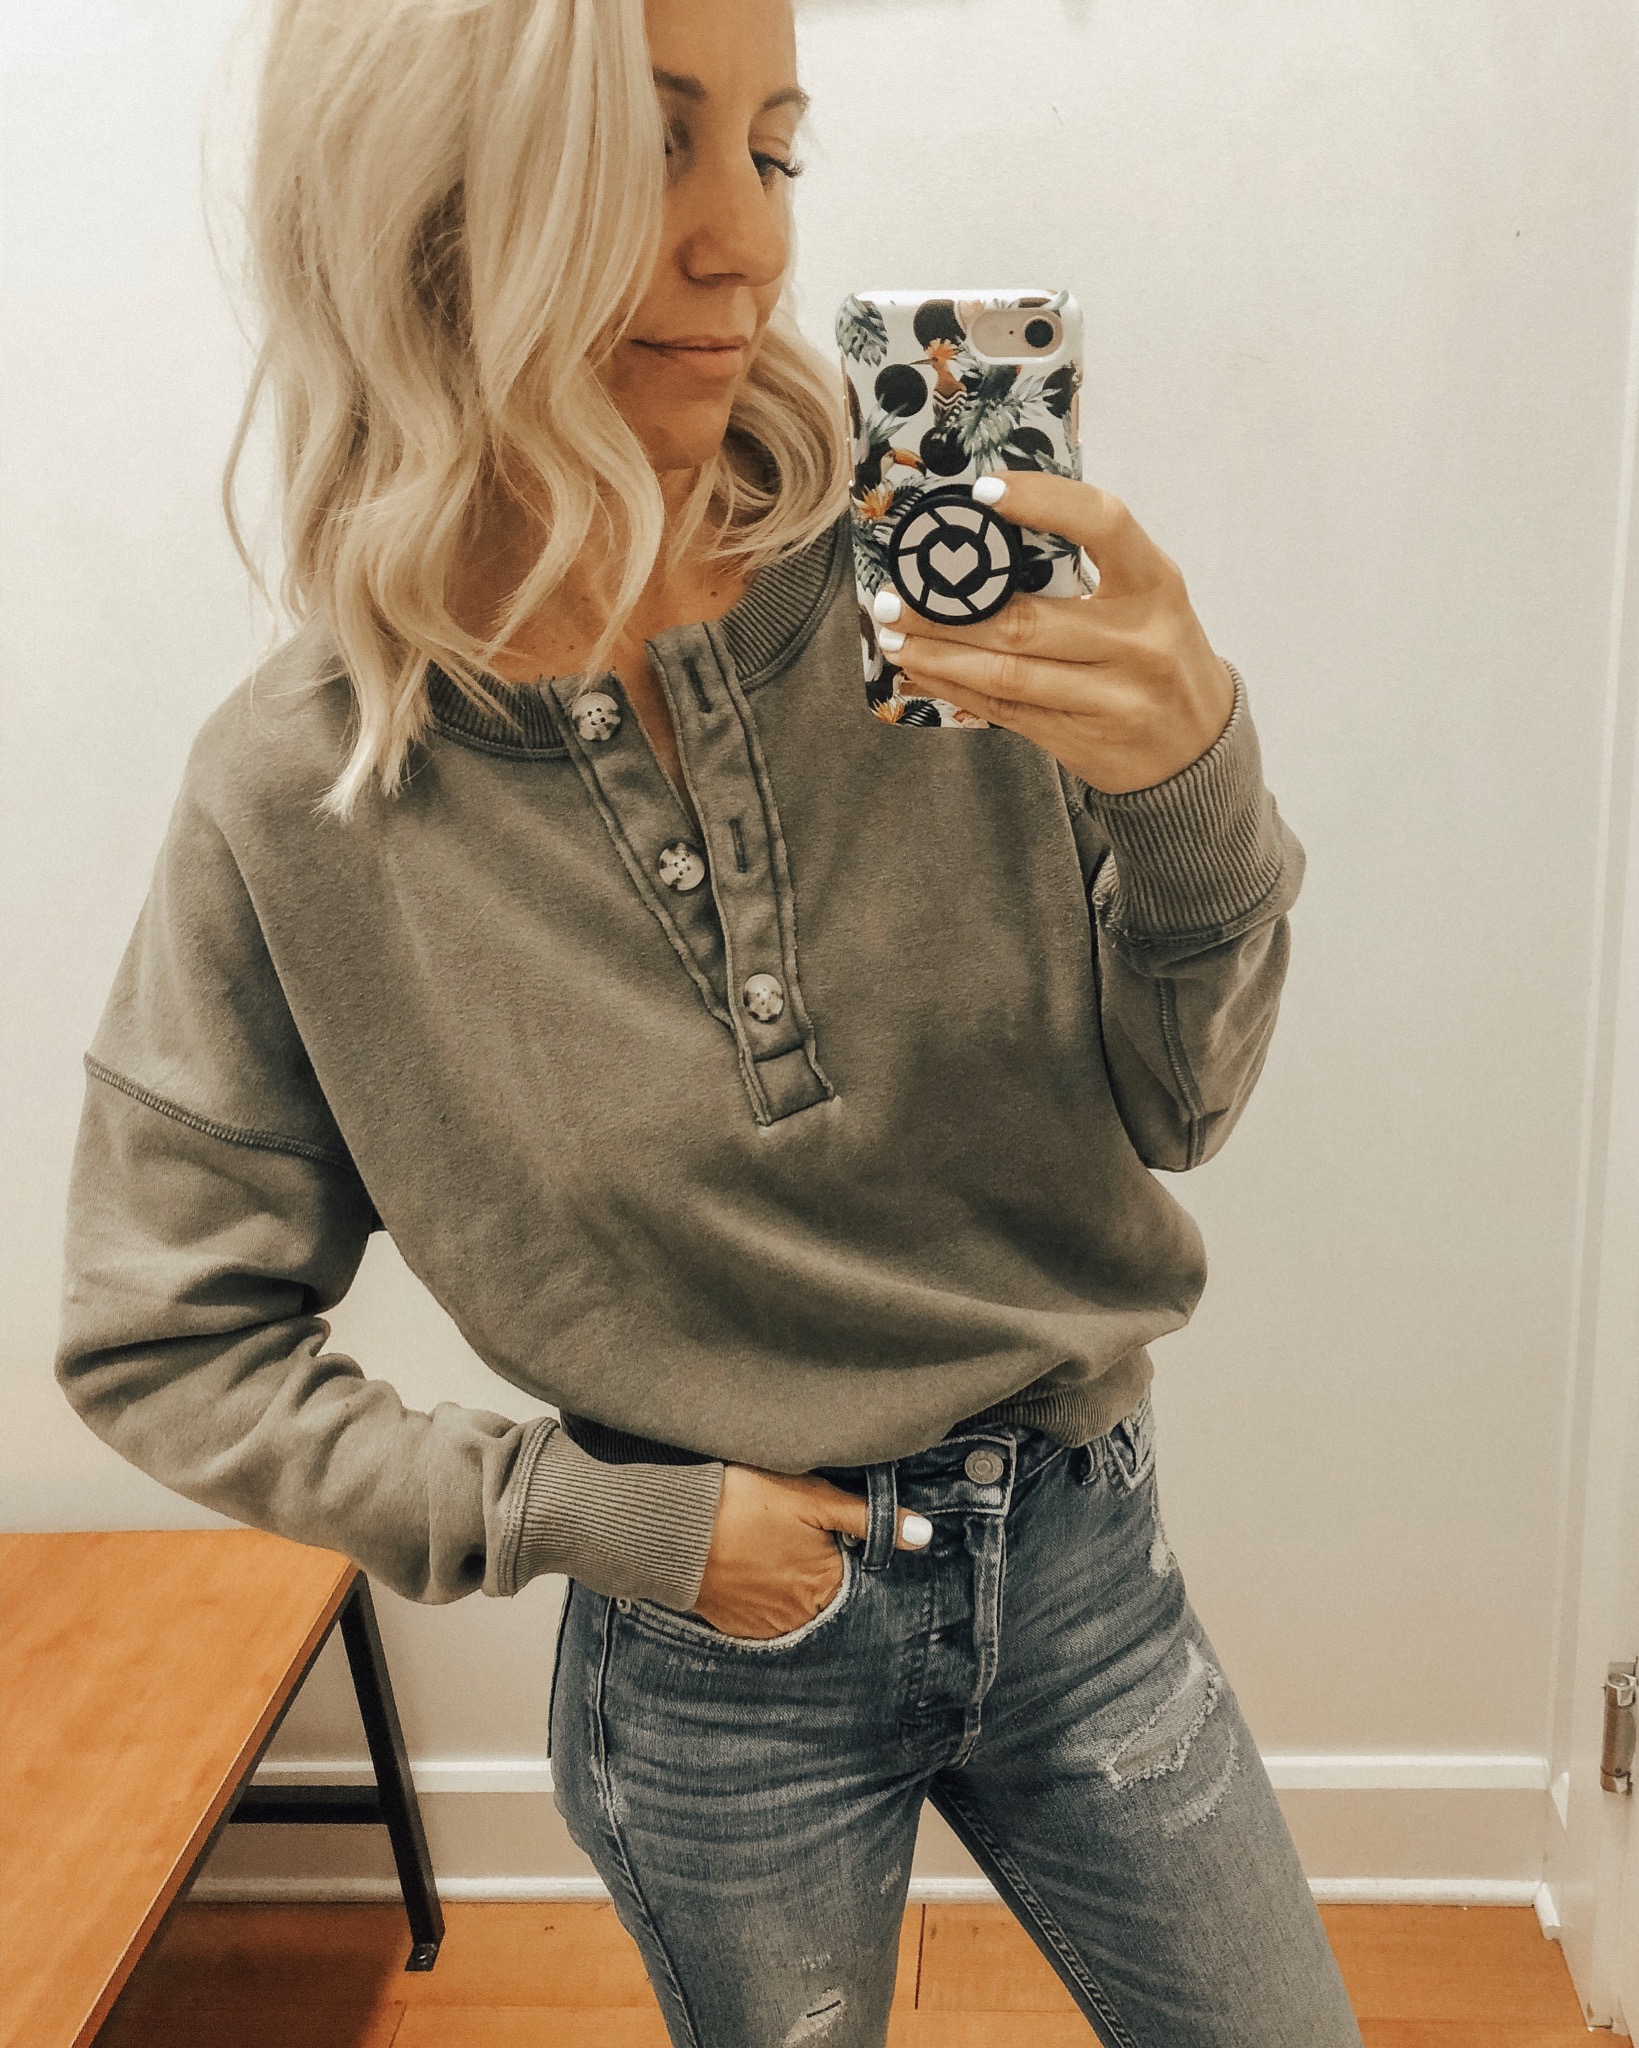 OCTOBER TOP 10- Jaclyn De Leon Style - Fall fashion + top selling items + cozy sweaters + camo leggings + leopard + sweater weather + what to buy this season + color block sweater + chevron